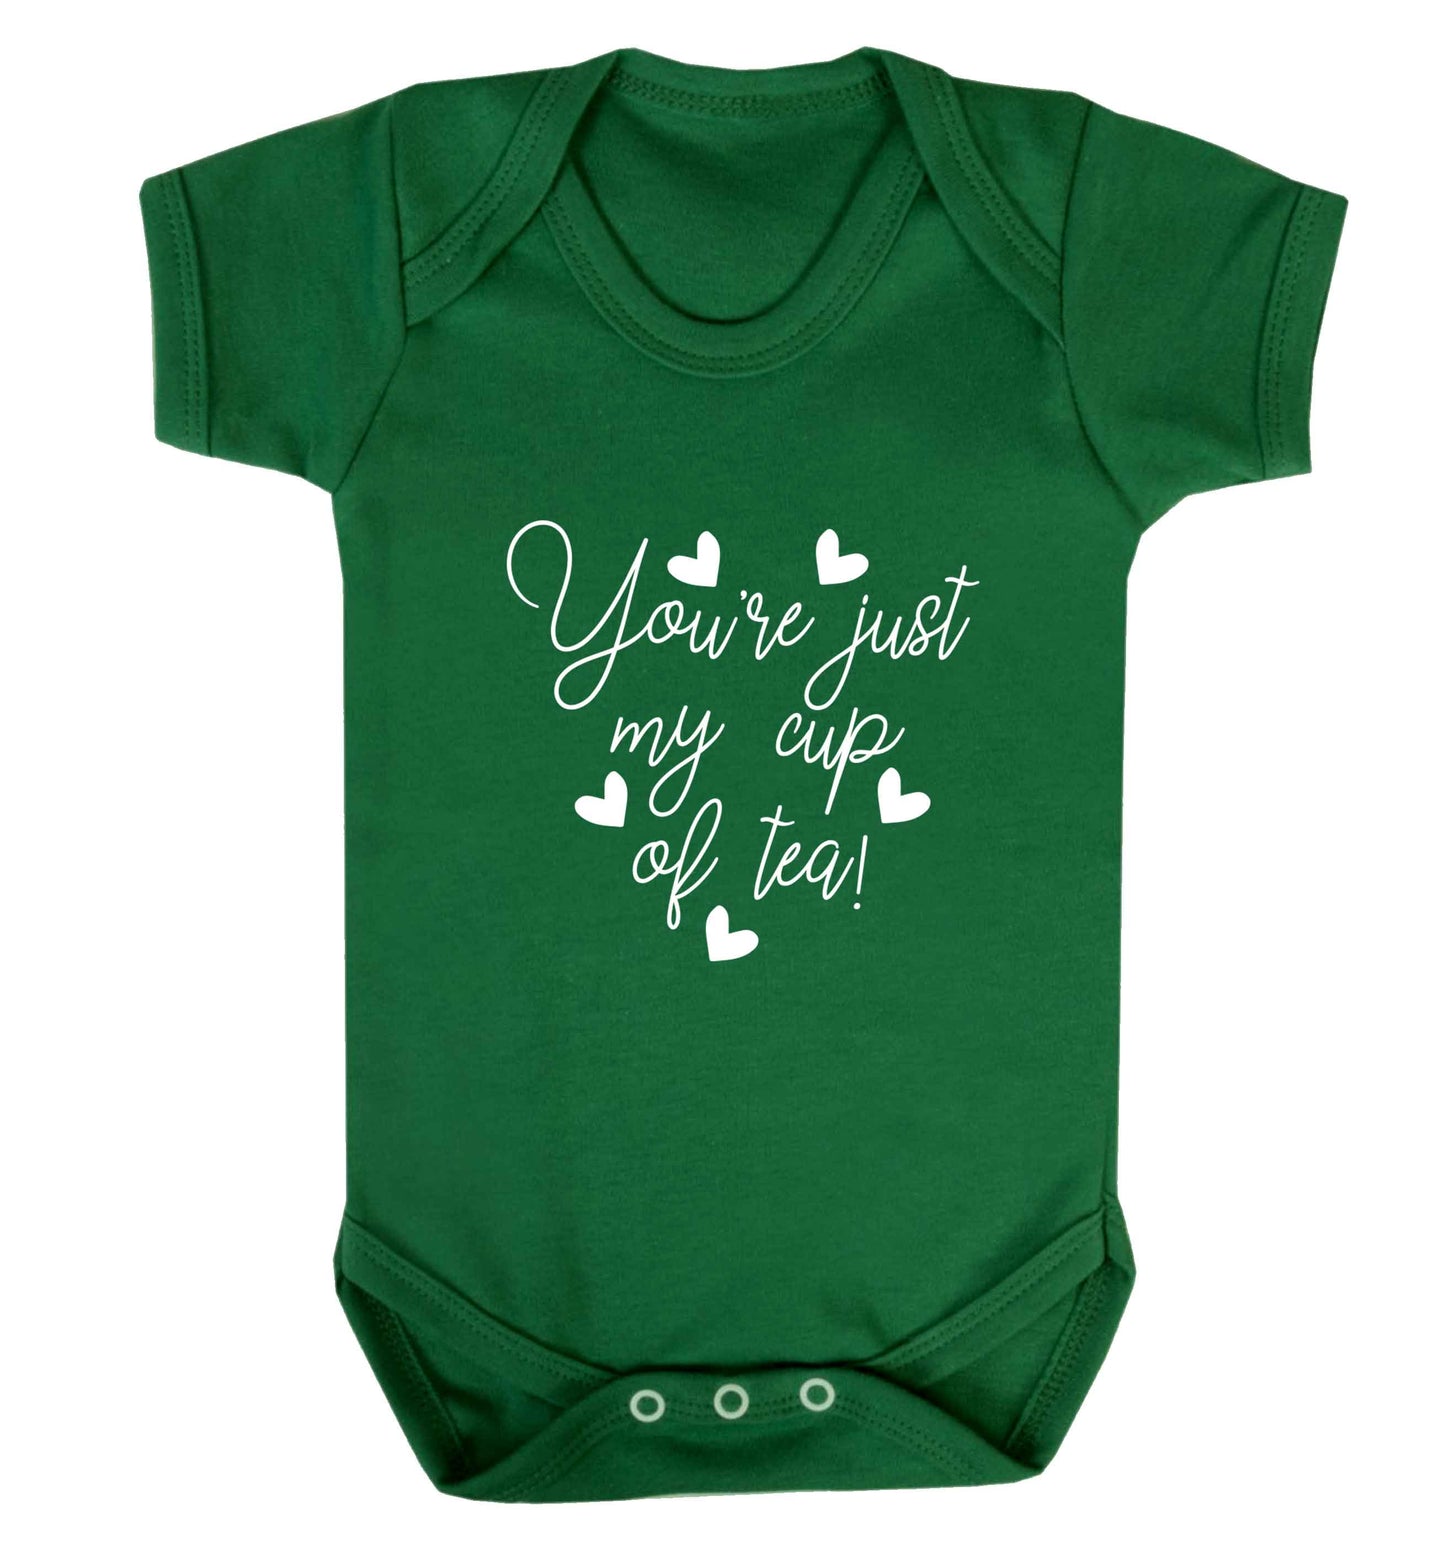 You're just my cup of tea baby vest green 18-24 months